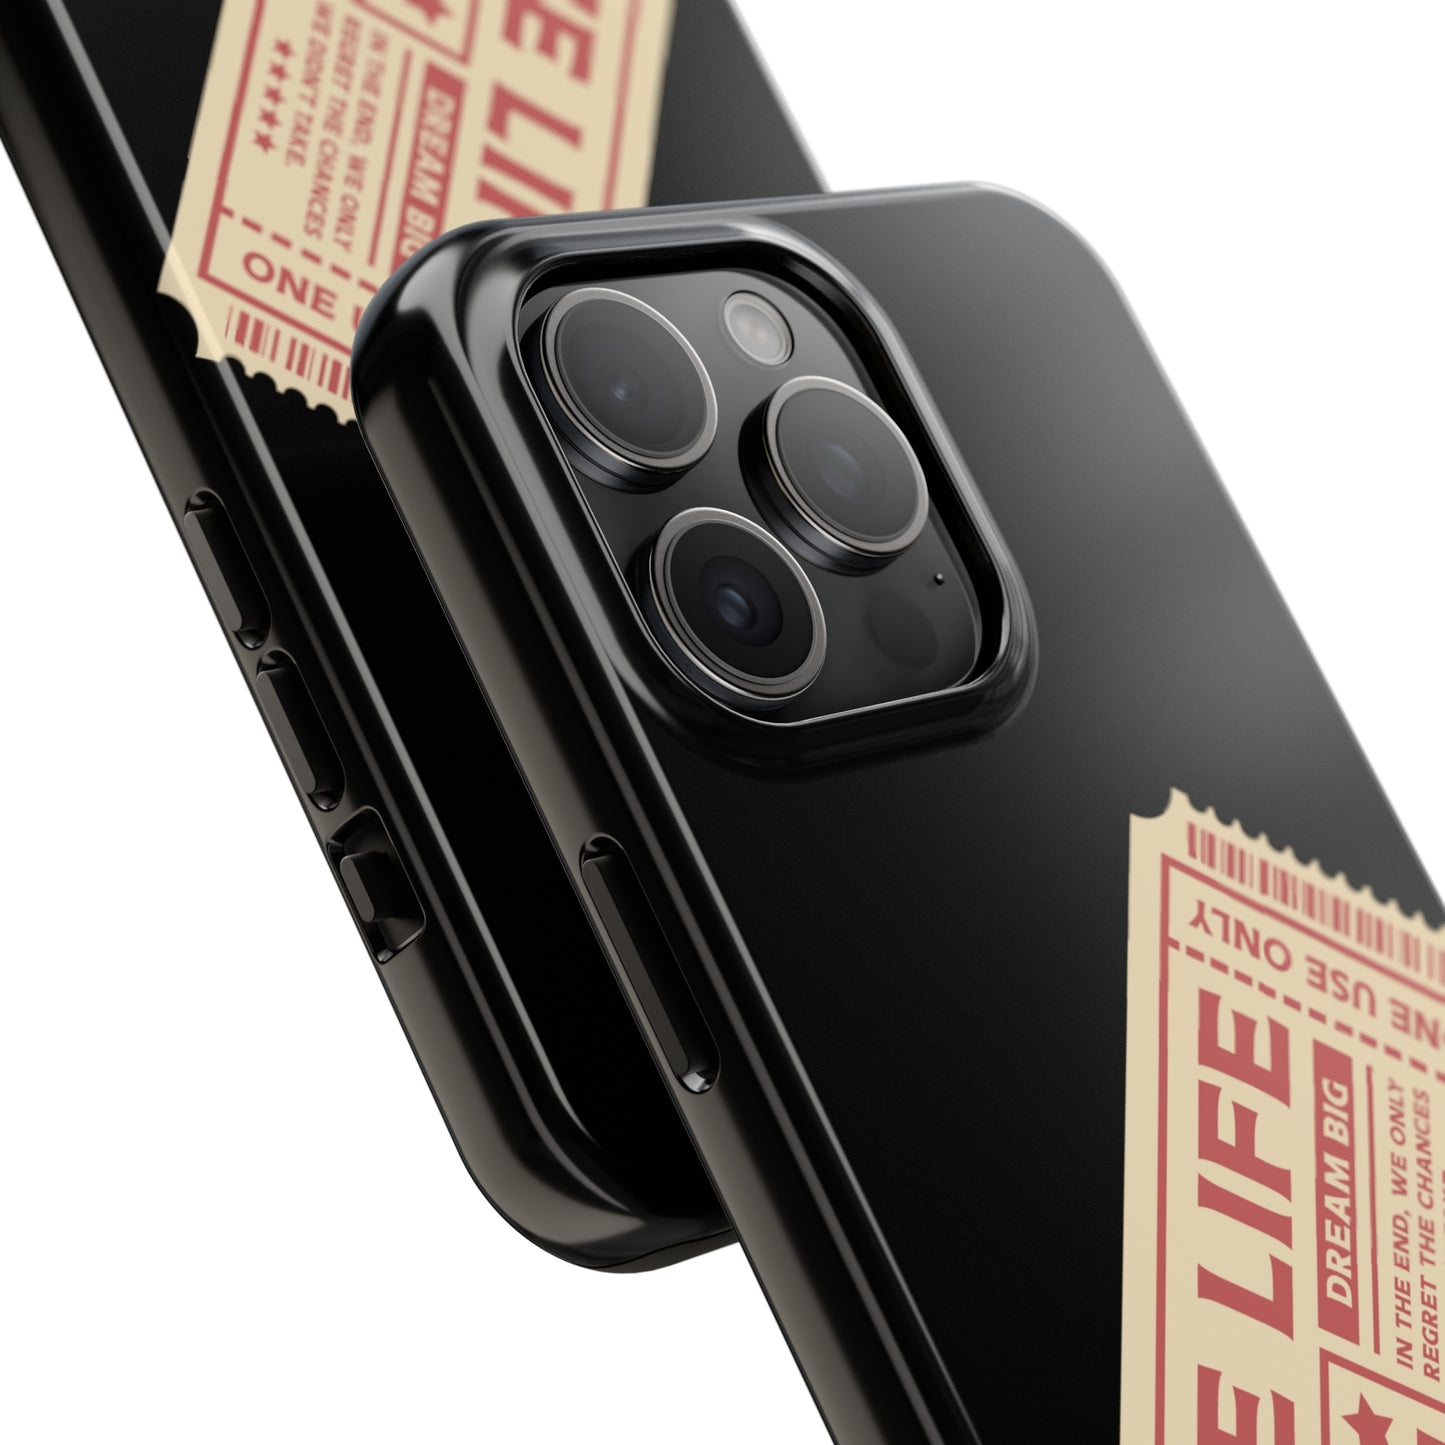 Ticket to Life: iPhone Tough Case Design - Wireless Charging - Superior Protection - Original Designs by TheGlassyLass.com